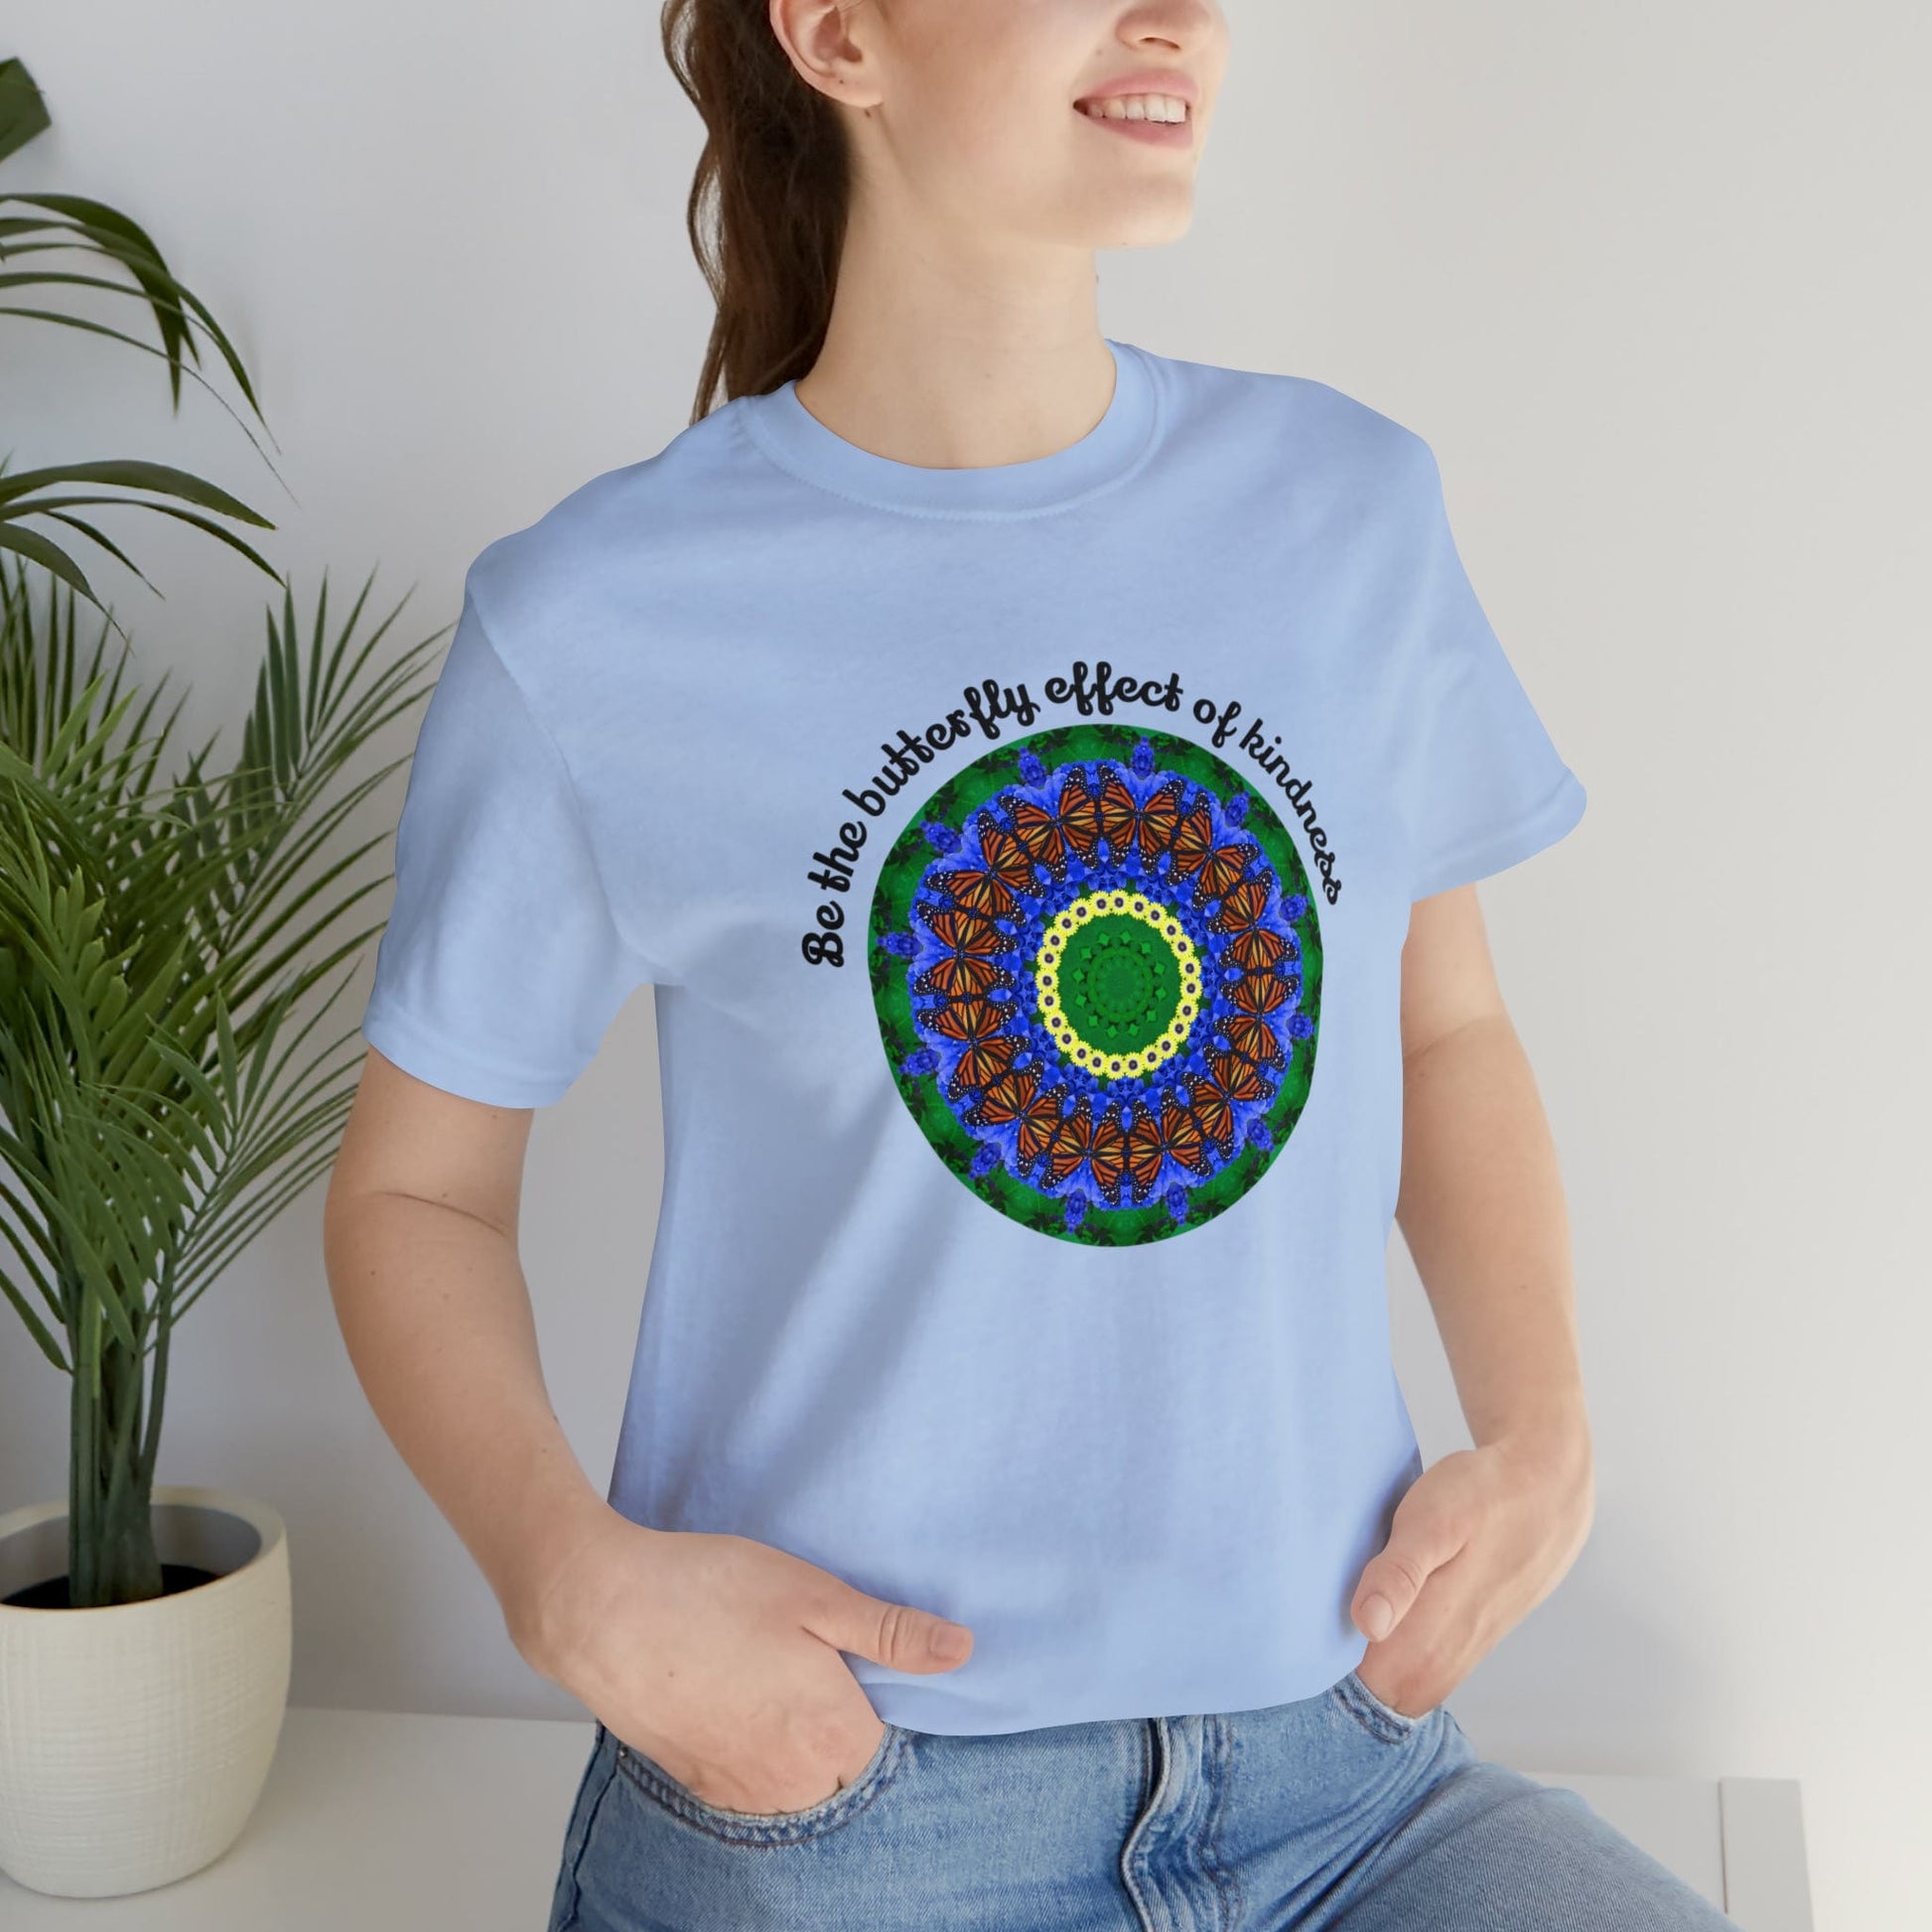 Cute Graphic Kindness Shirts  - Beautiful Monarch Butterfly Mandala Art For Positive Vibes – Butterfly Effect baby blue